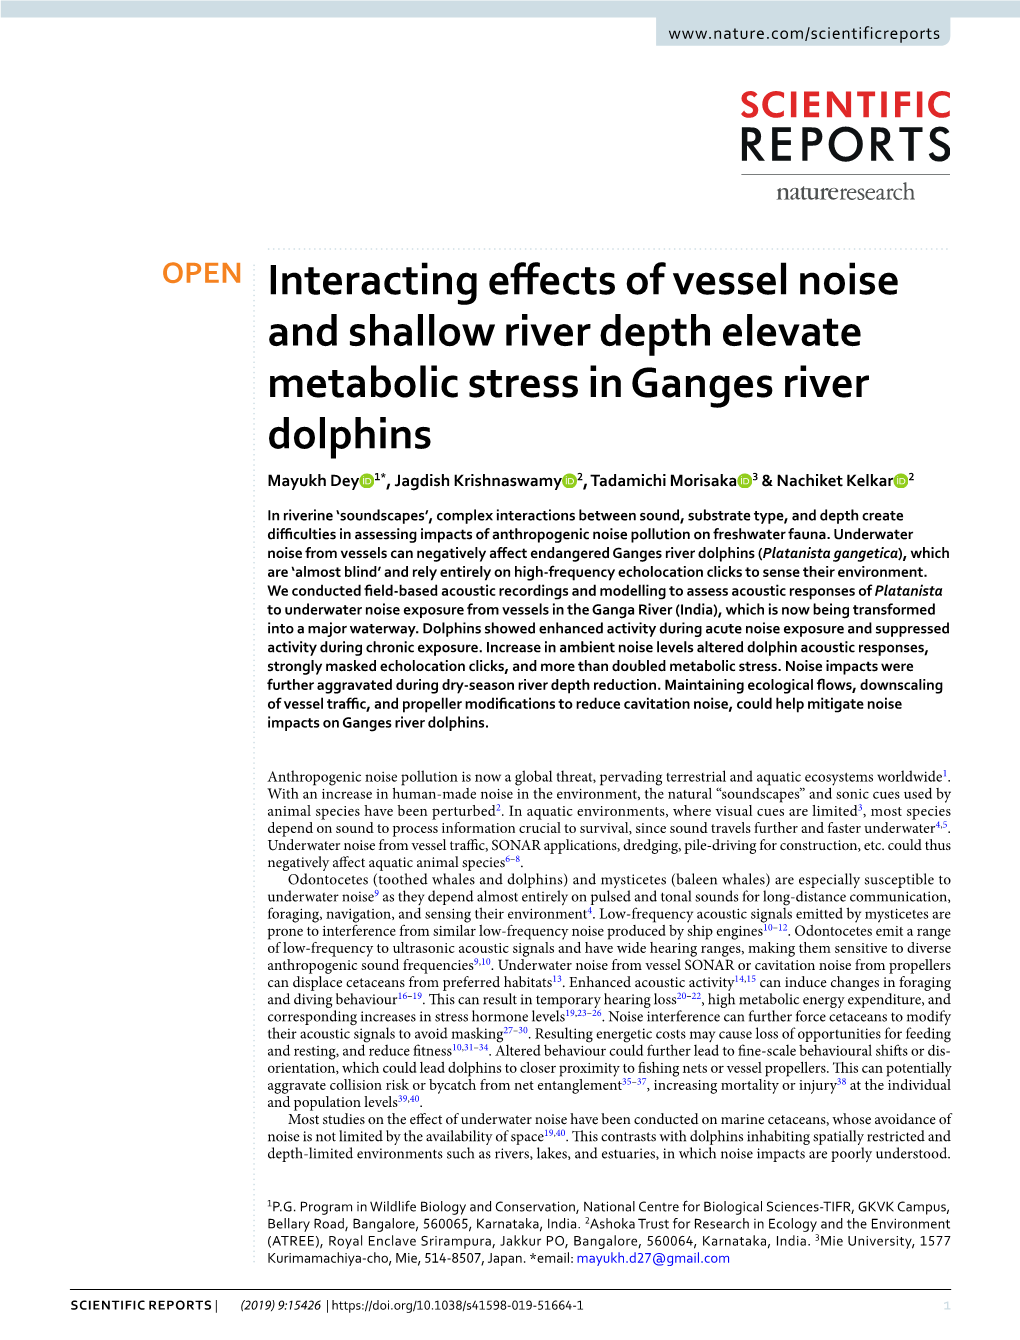 Interacting Effects of Vessel Noise and Shallow River Depth Elevate